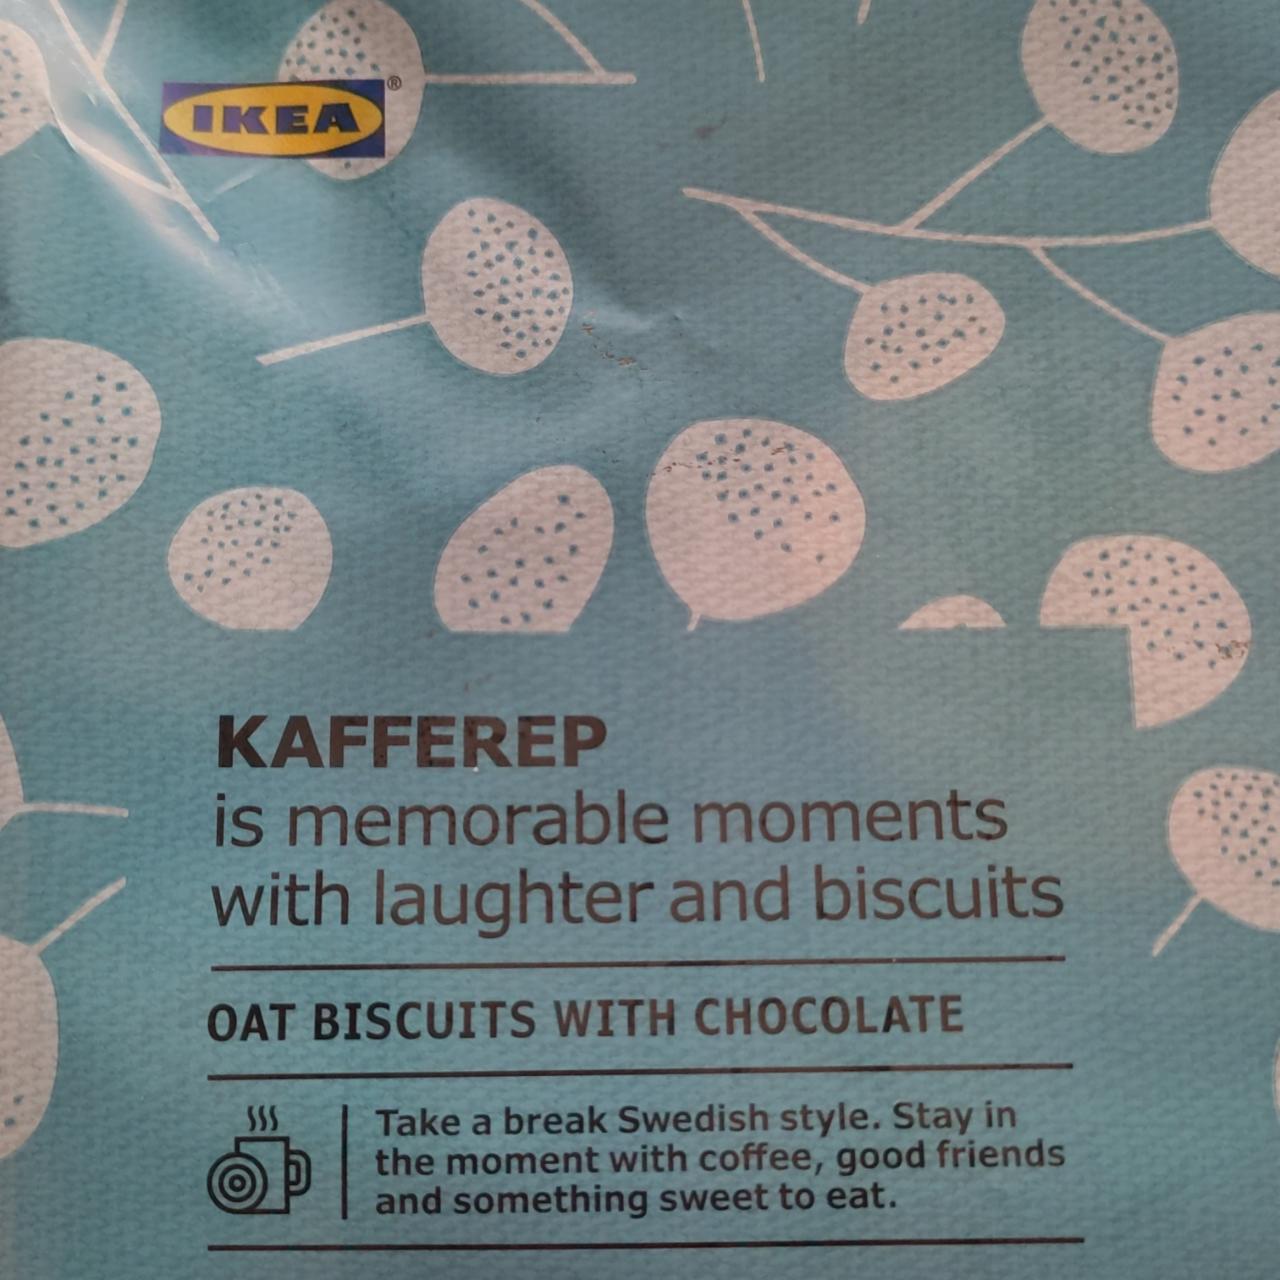 Képek - Kafferep Oat biscuits with chocolate Ikea